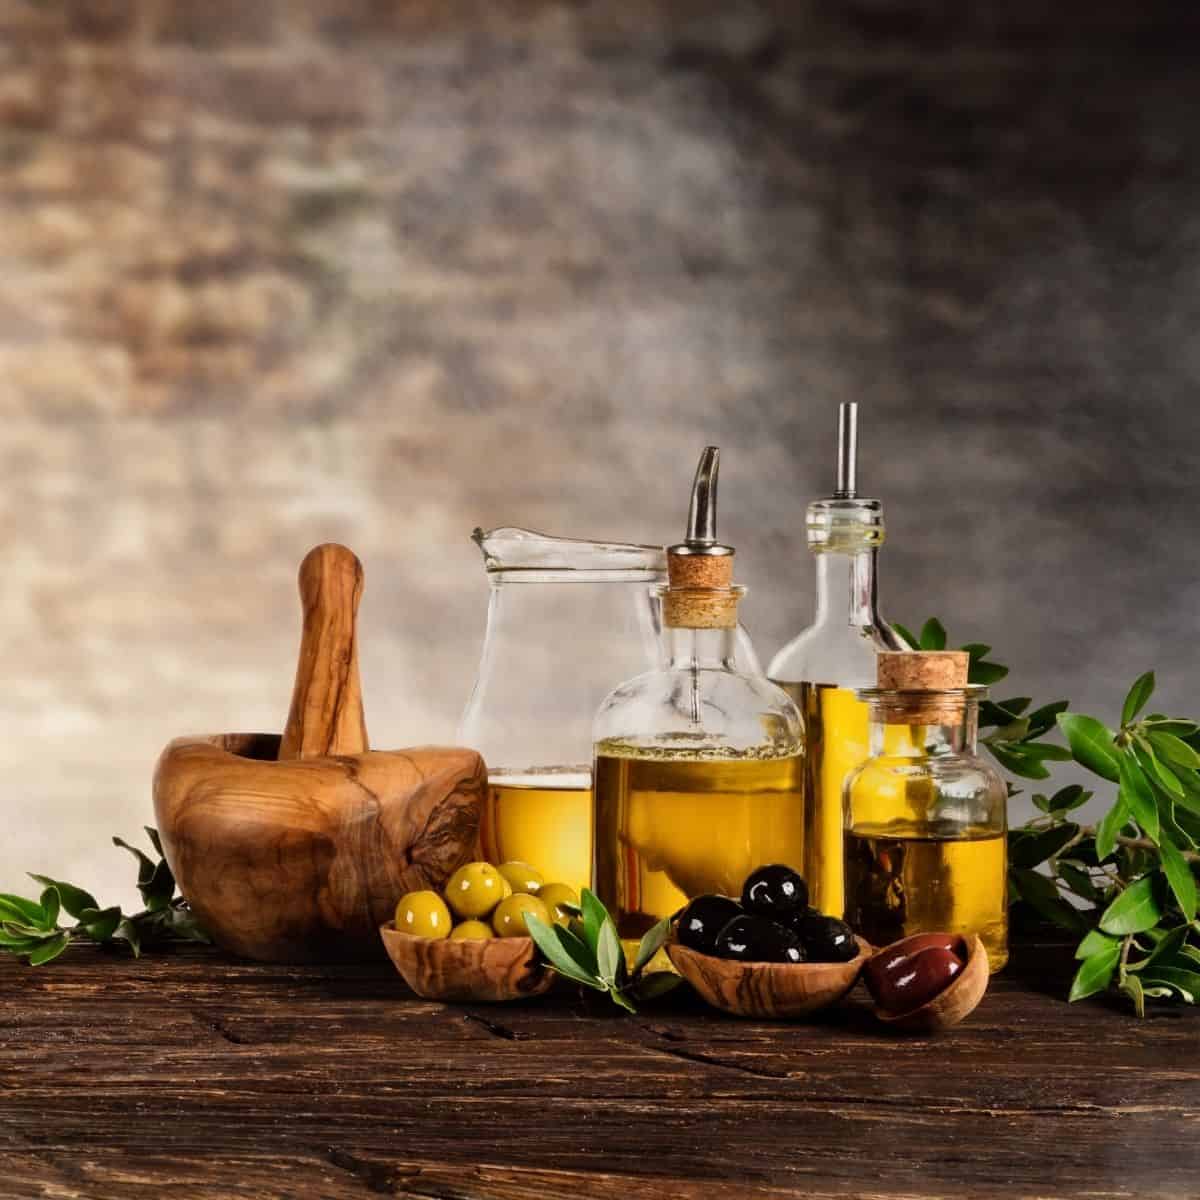 Does olive oil go bad?